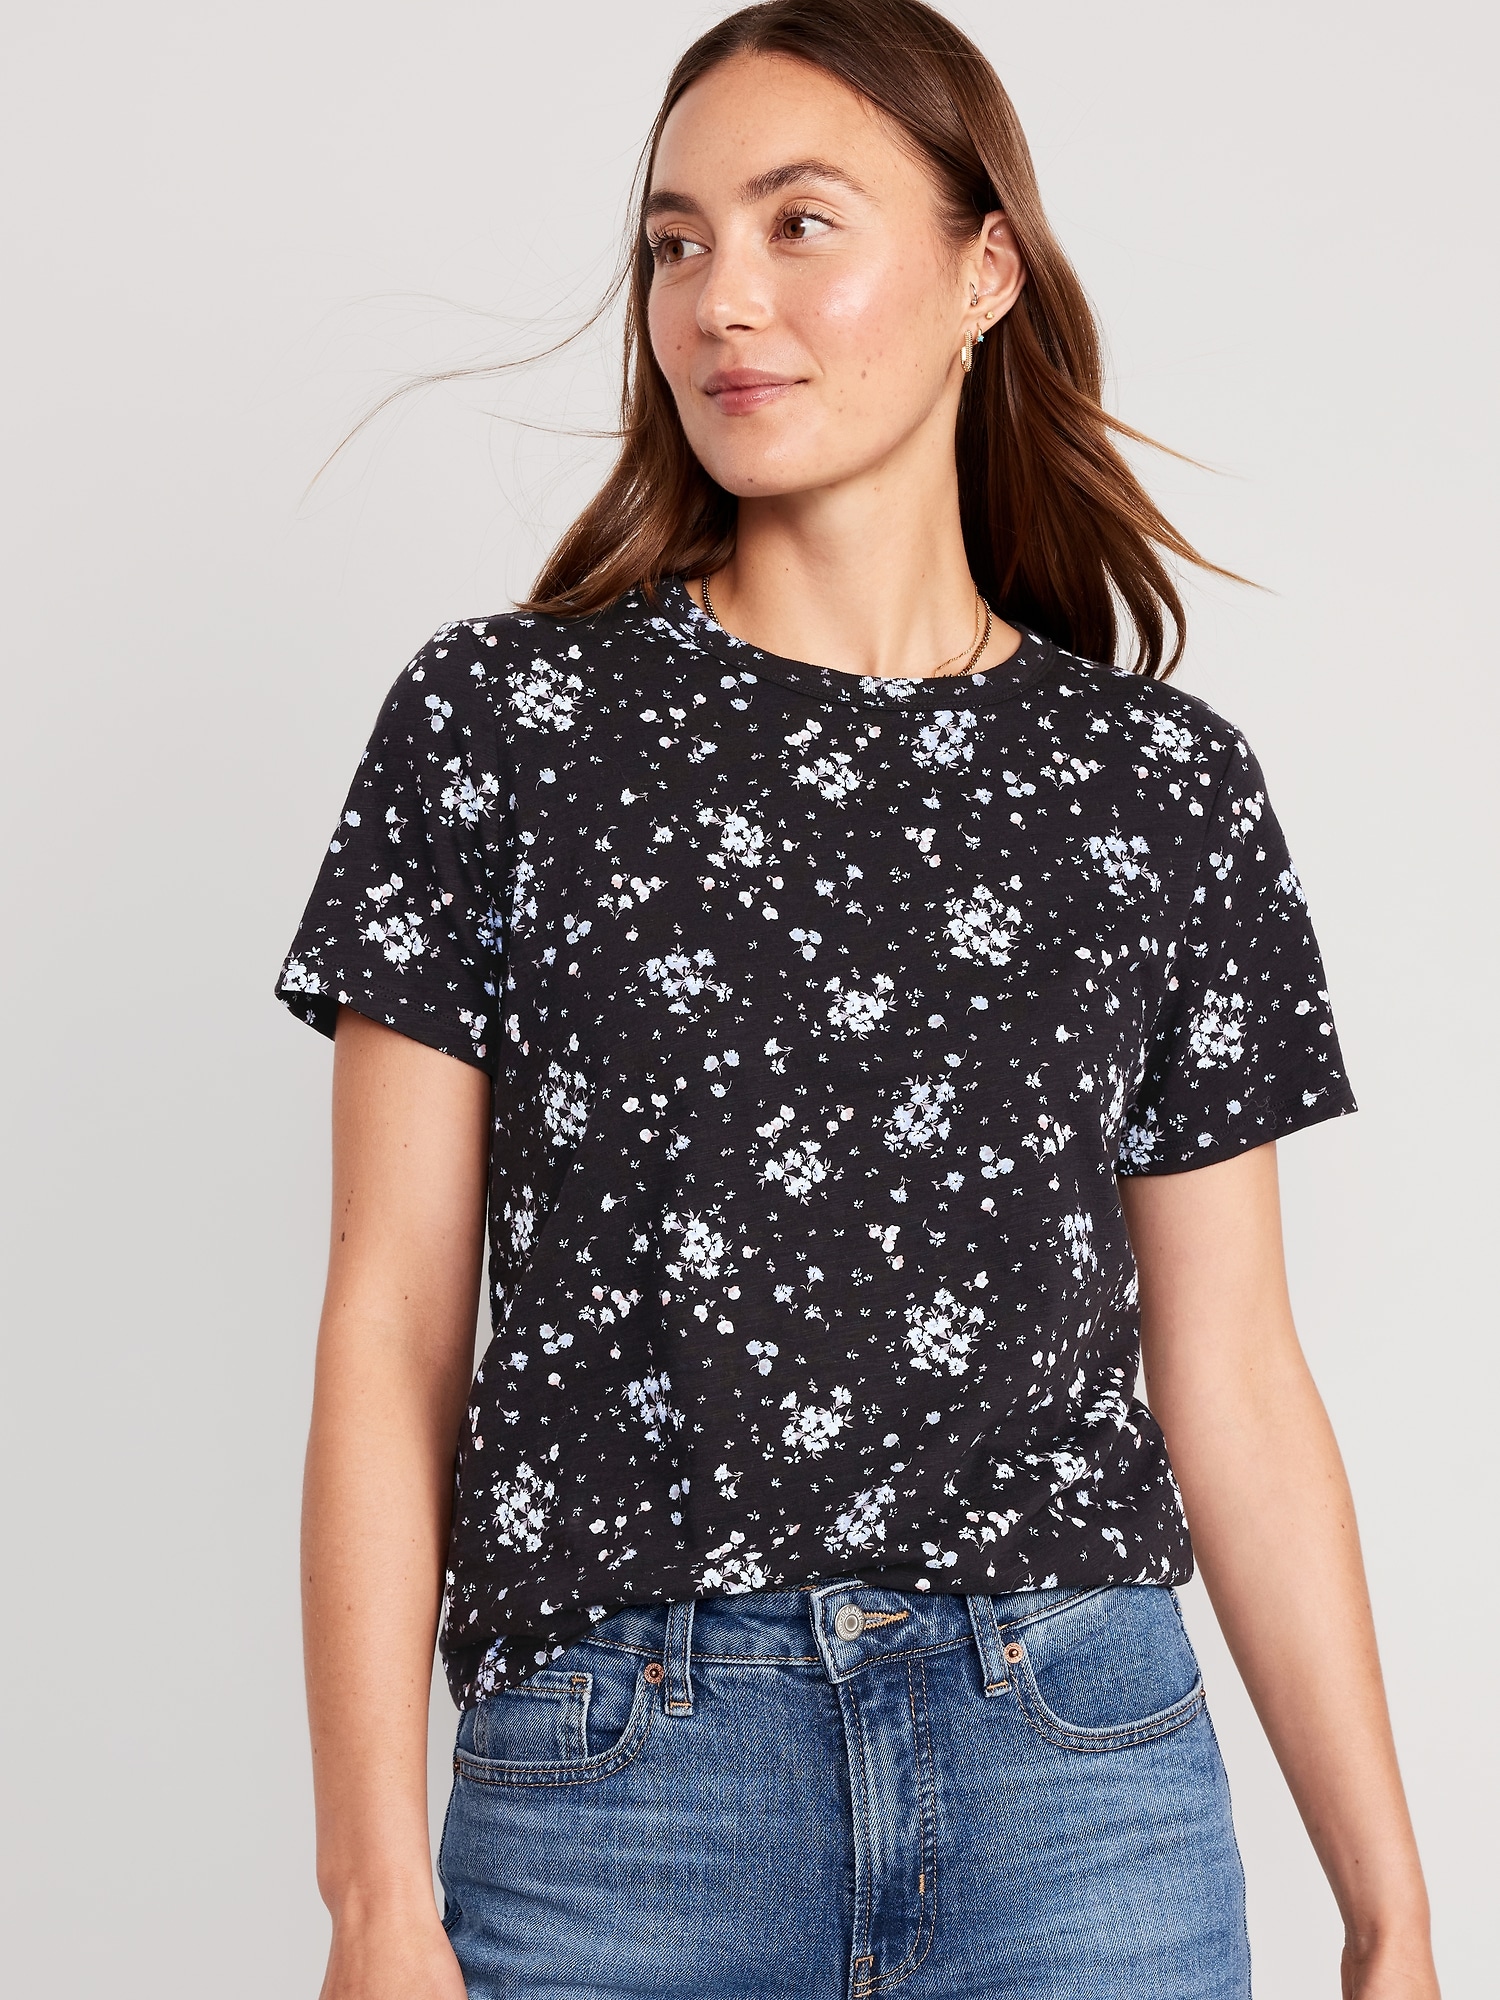 Old Navy Graphic & Solid Tees from $6 (Regularly $13+)